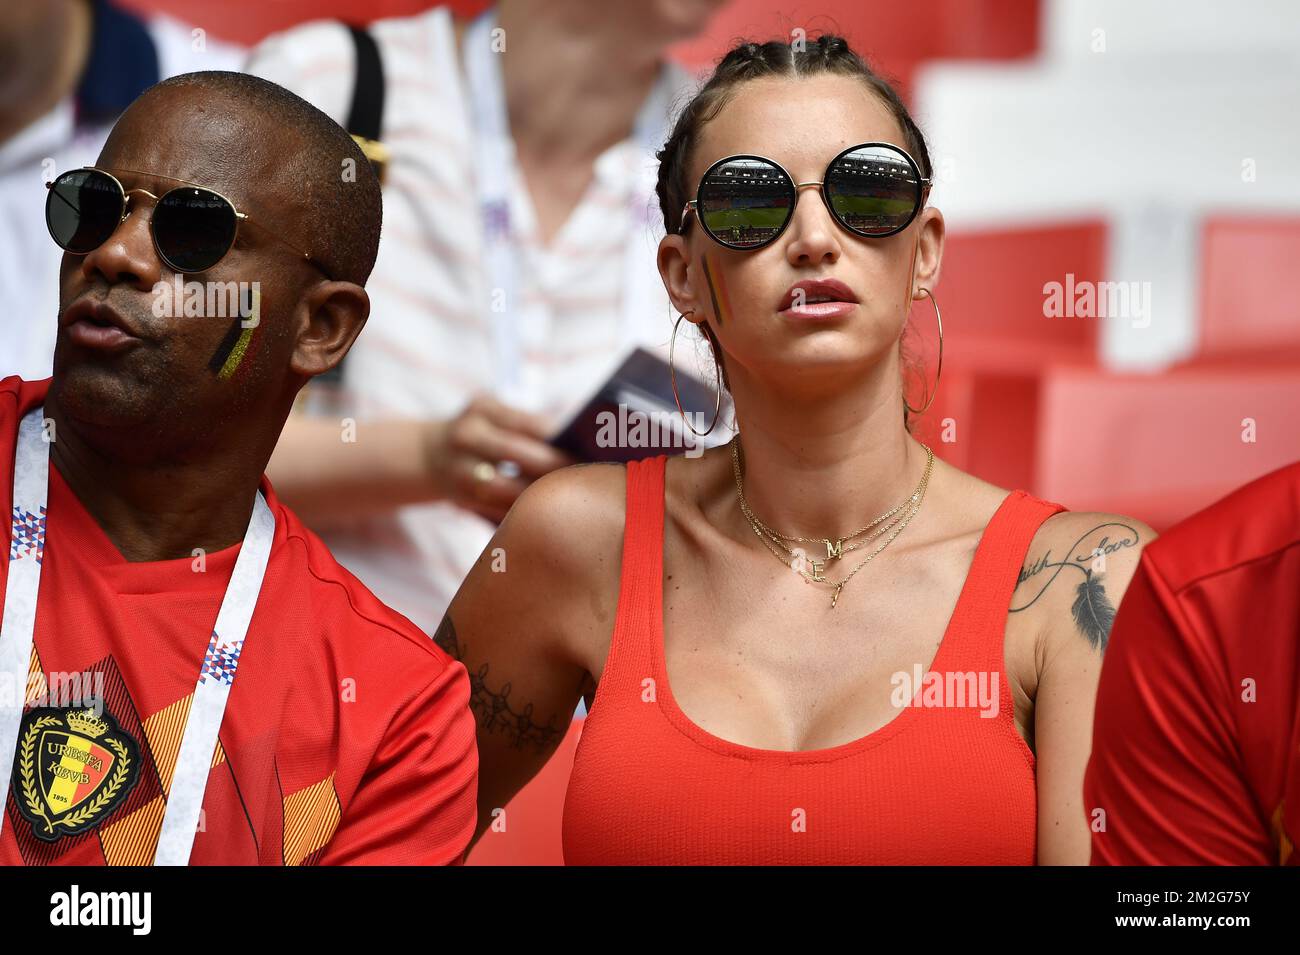 Witsel's father Thierry and Witsel's wife Rafaella Szabo pictured in the  stands ahead of the second game of Belgian national soccer team the Red  Devils against Tunisia national team in the Spartak